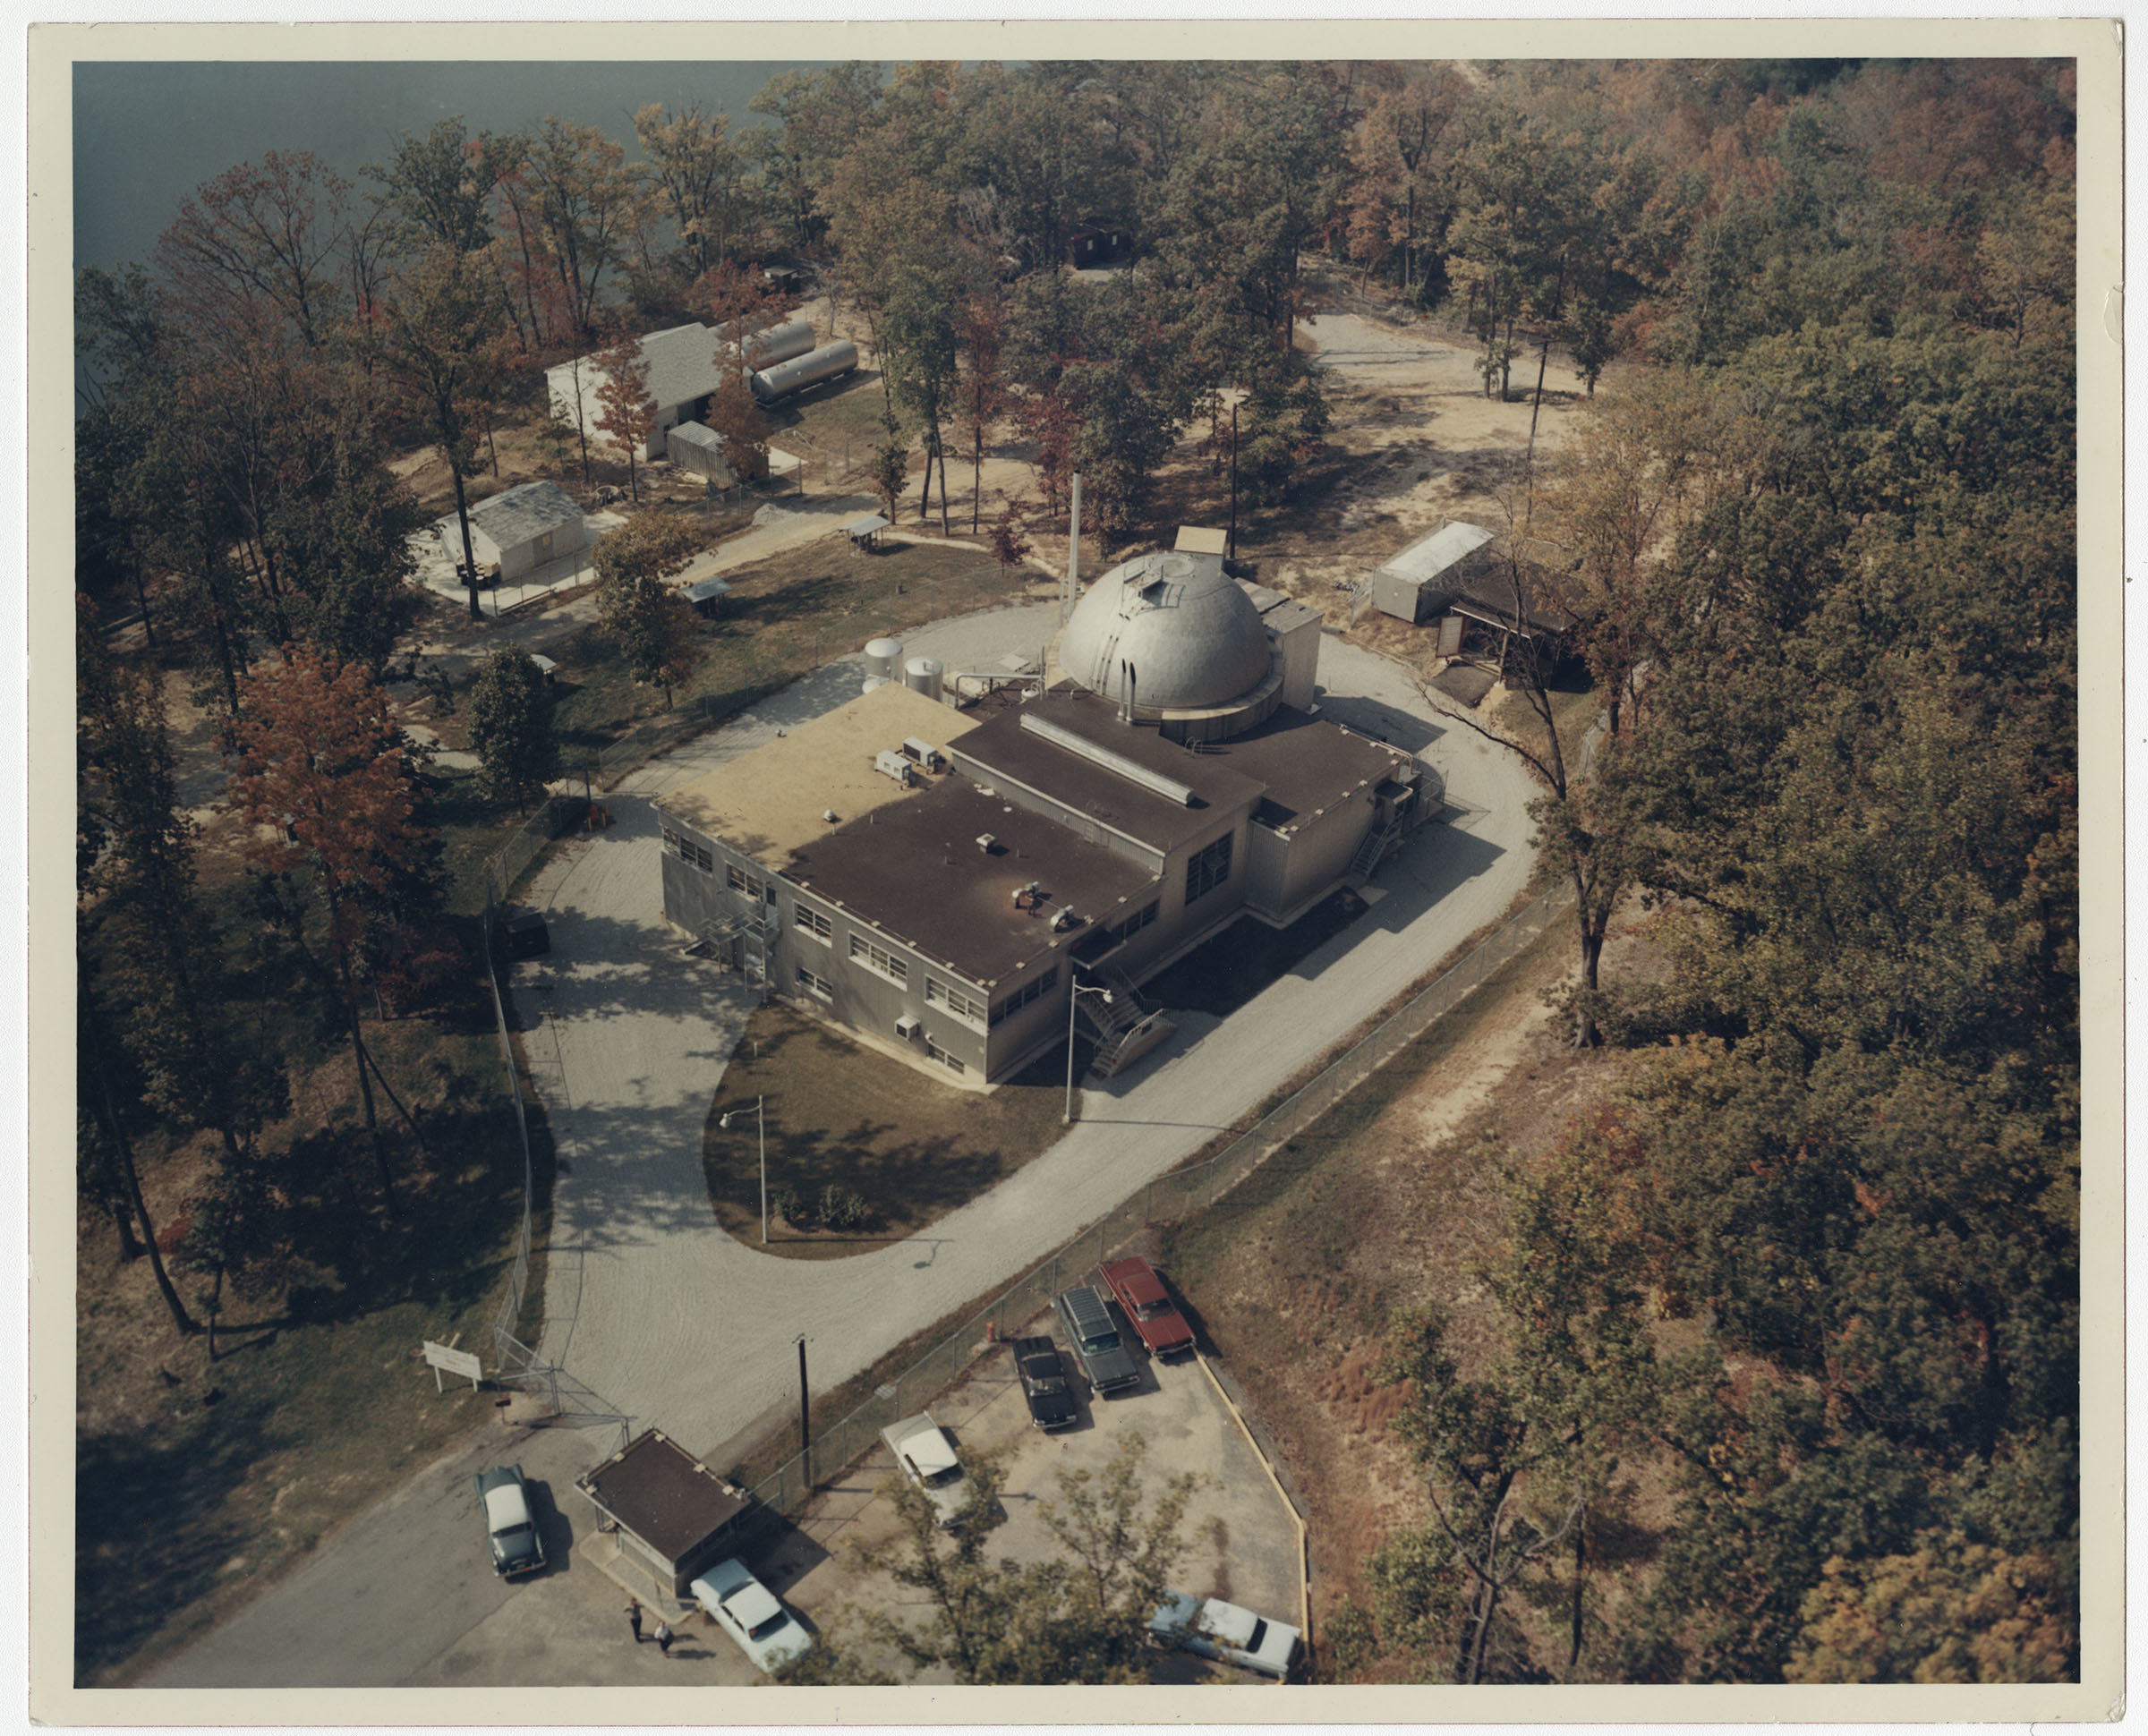 Aerial view of SM-1 nuclear reactor and plant circa the 1960s. SM-1 was the first nuclear power plant to successfully provide power to the commercial grid when it came online in April 1957. While SM-1’s reactor was initially deactivated in 1973, the U.S. Army Corps of Engineers is in the process of planning for the reactor’s decommissioning and dismantlement of the facility.